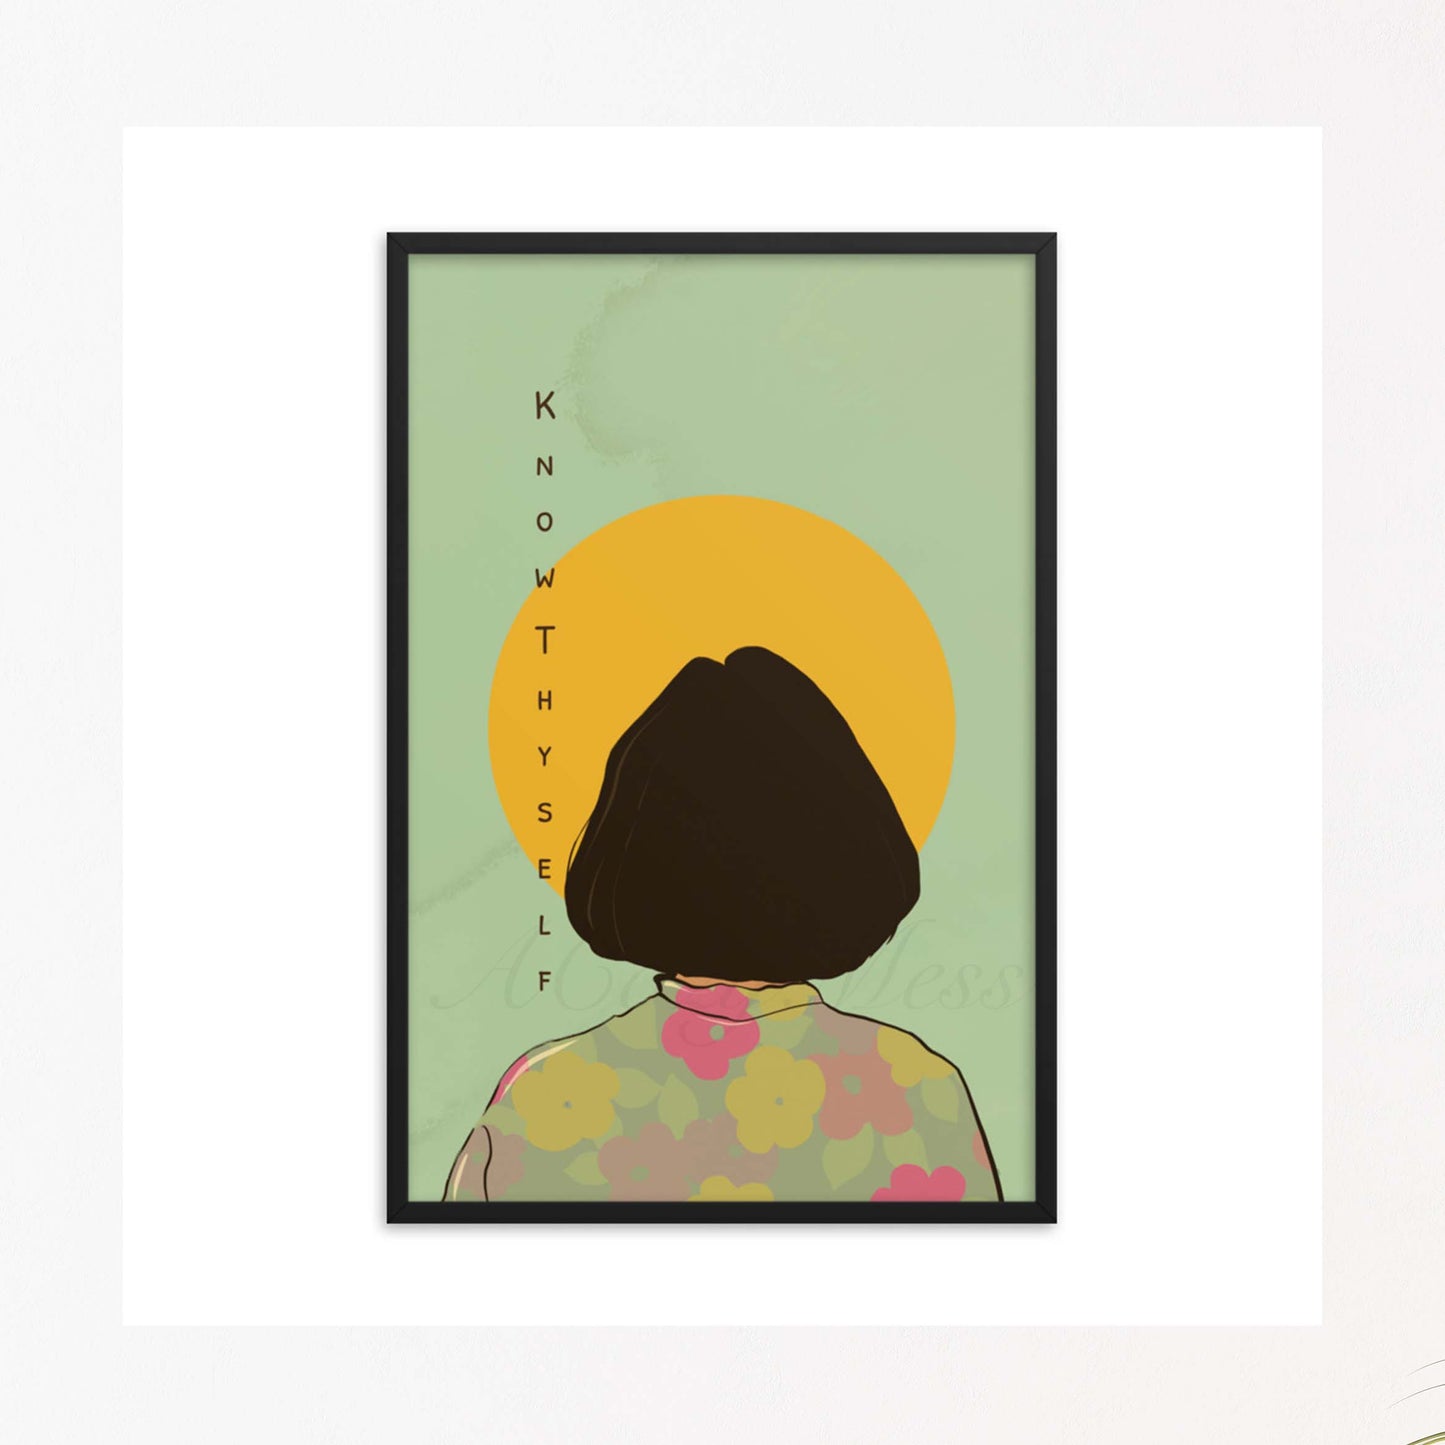 Illustration of a woman in a floral shirt facing the sun with the phrase 'Know Thyself' written alongside in black frame